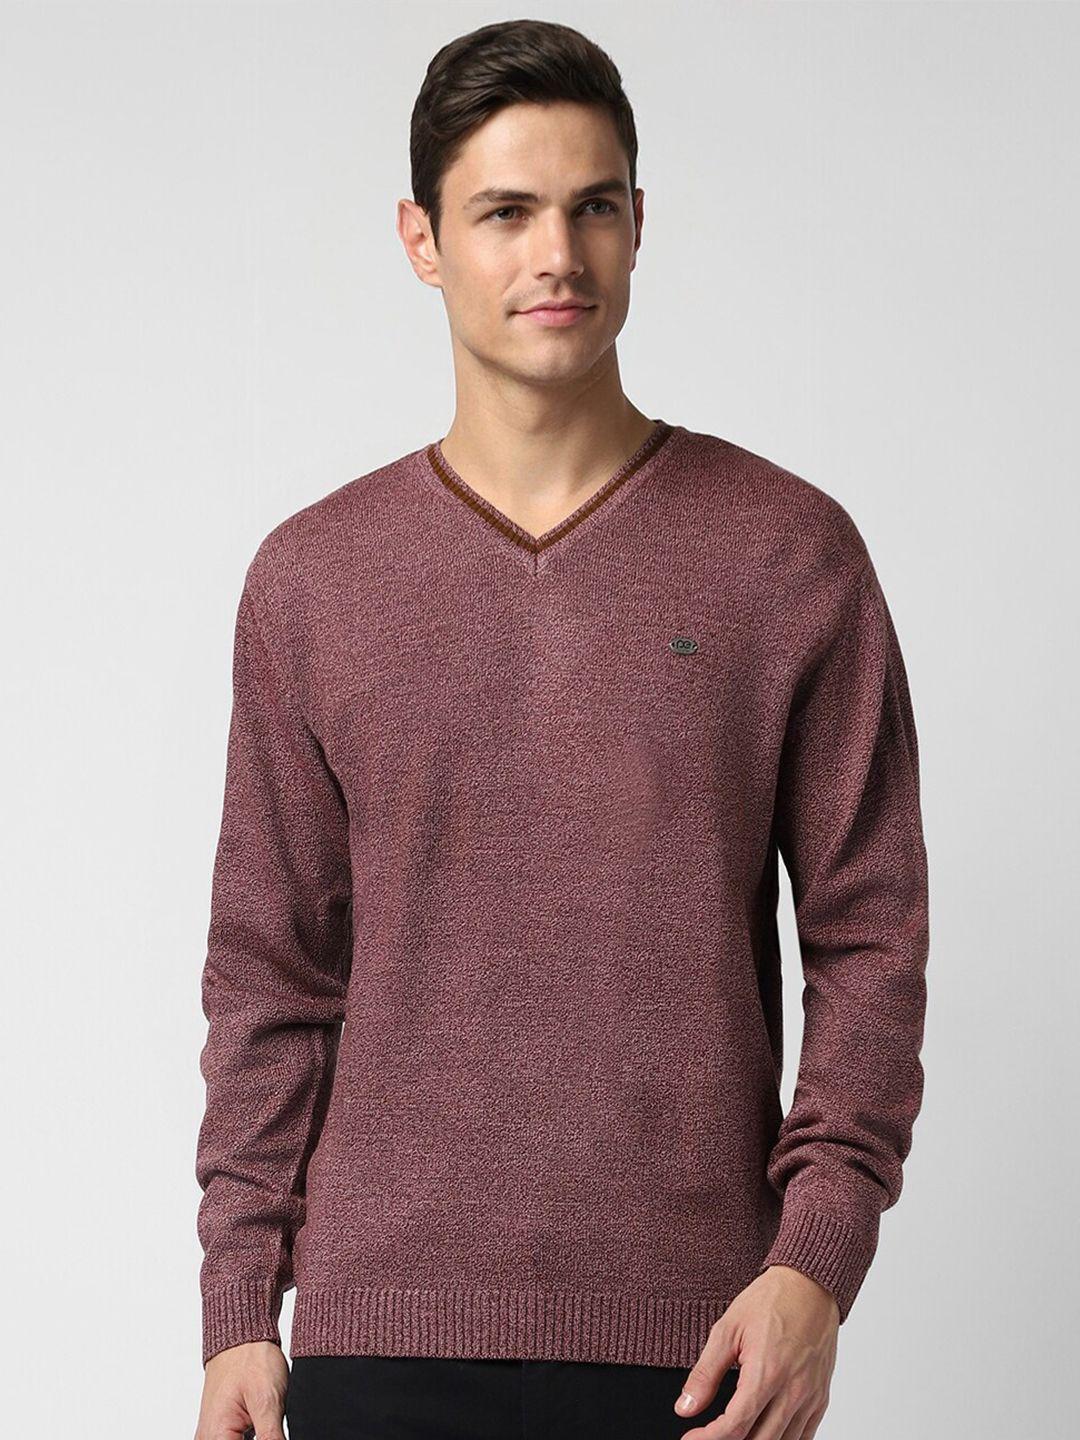 peter england casuals textured v-neck pullover